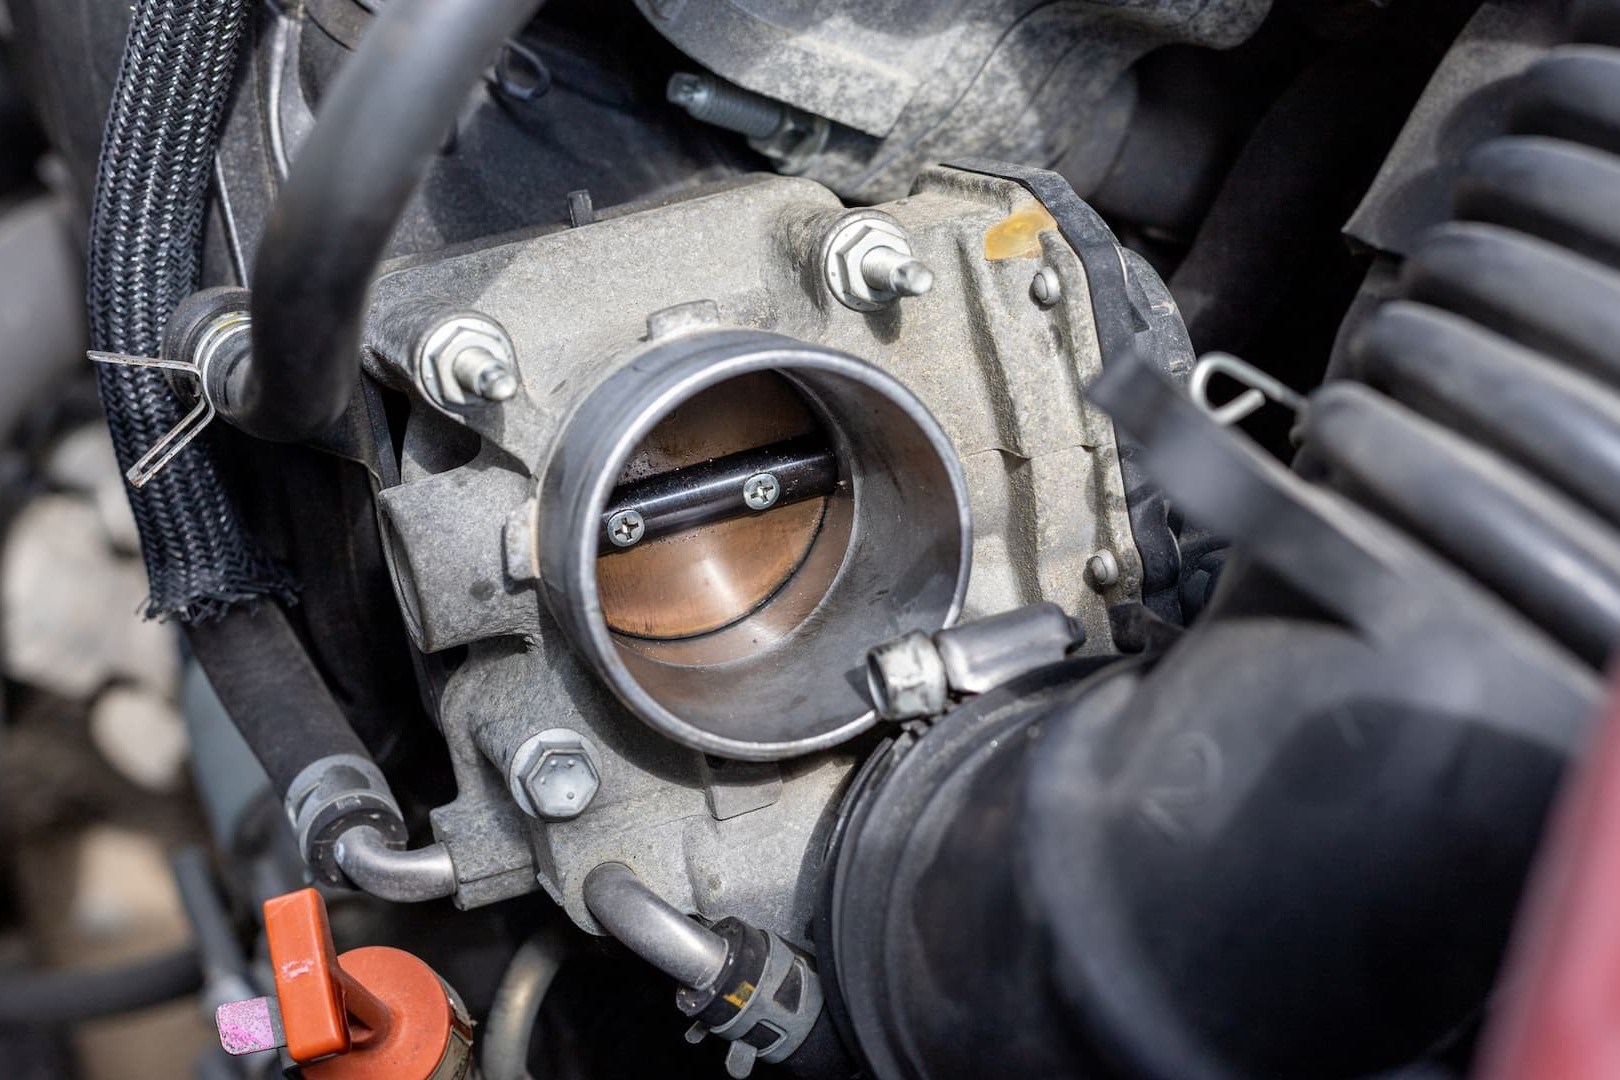 Signs Of A Faulty Throttle Body Or Sensor – Don’t Miss These Red Flags!